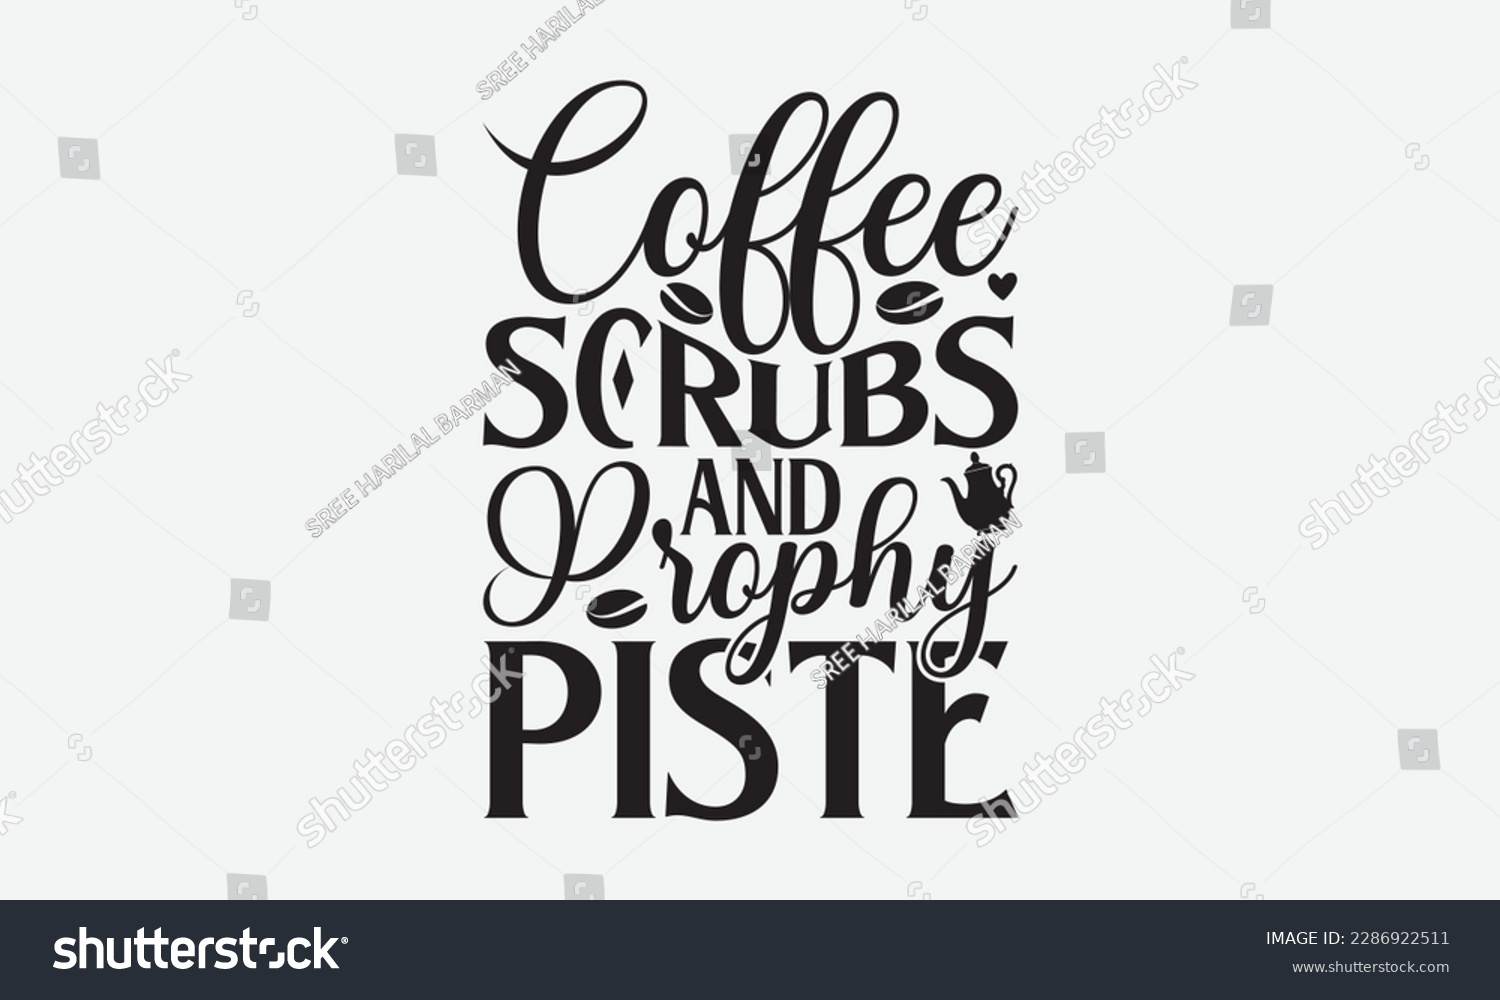 SVG of Coffee Scrubs and Prophy Piste - Dentist T-shirt Design, Conceptual handwritten phrase craft SVG hand-lettered, Handmade calligraphy vector illustration, template, greeting cards, mugs, brochures, svg